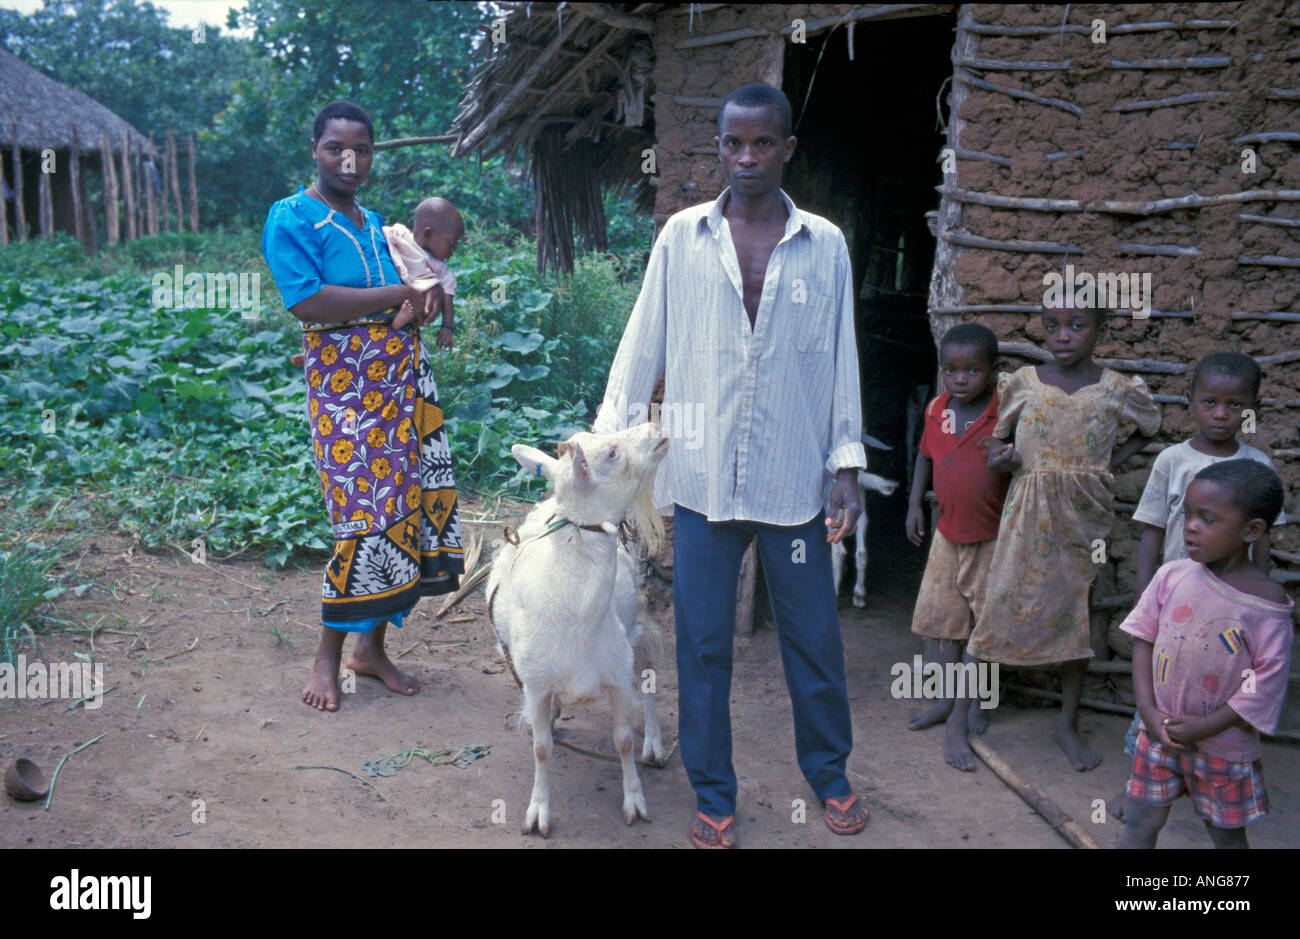 AFRICA KENYA KWALI Kenyan family with their Heifer Project International goats received for the community dairy goat project Stock Photo